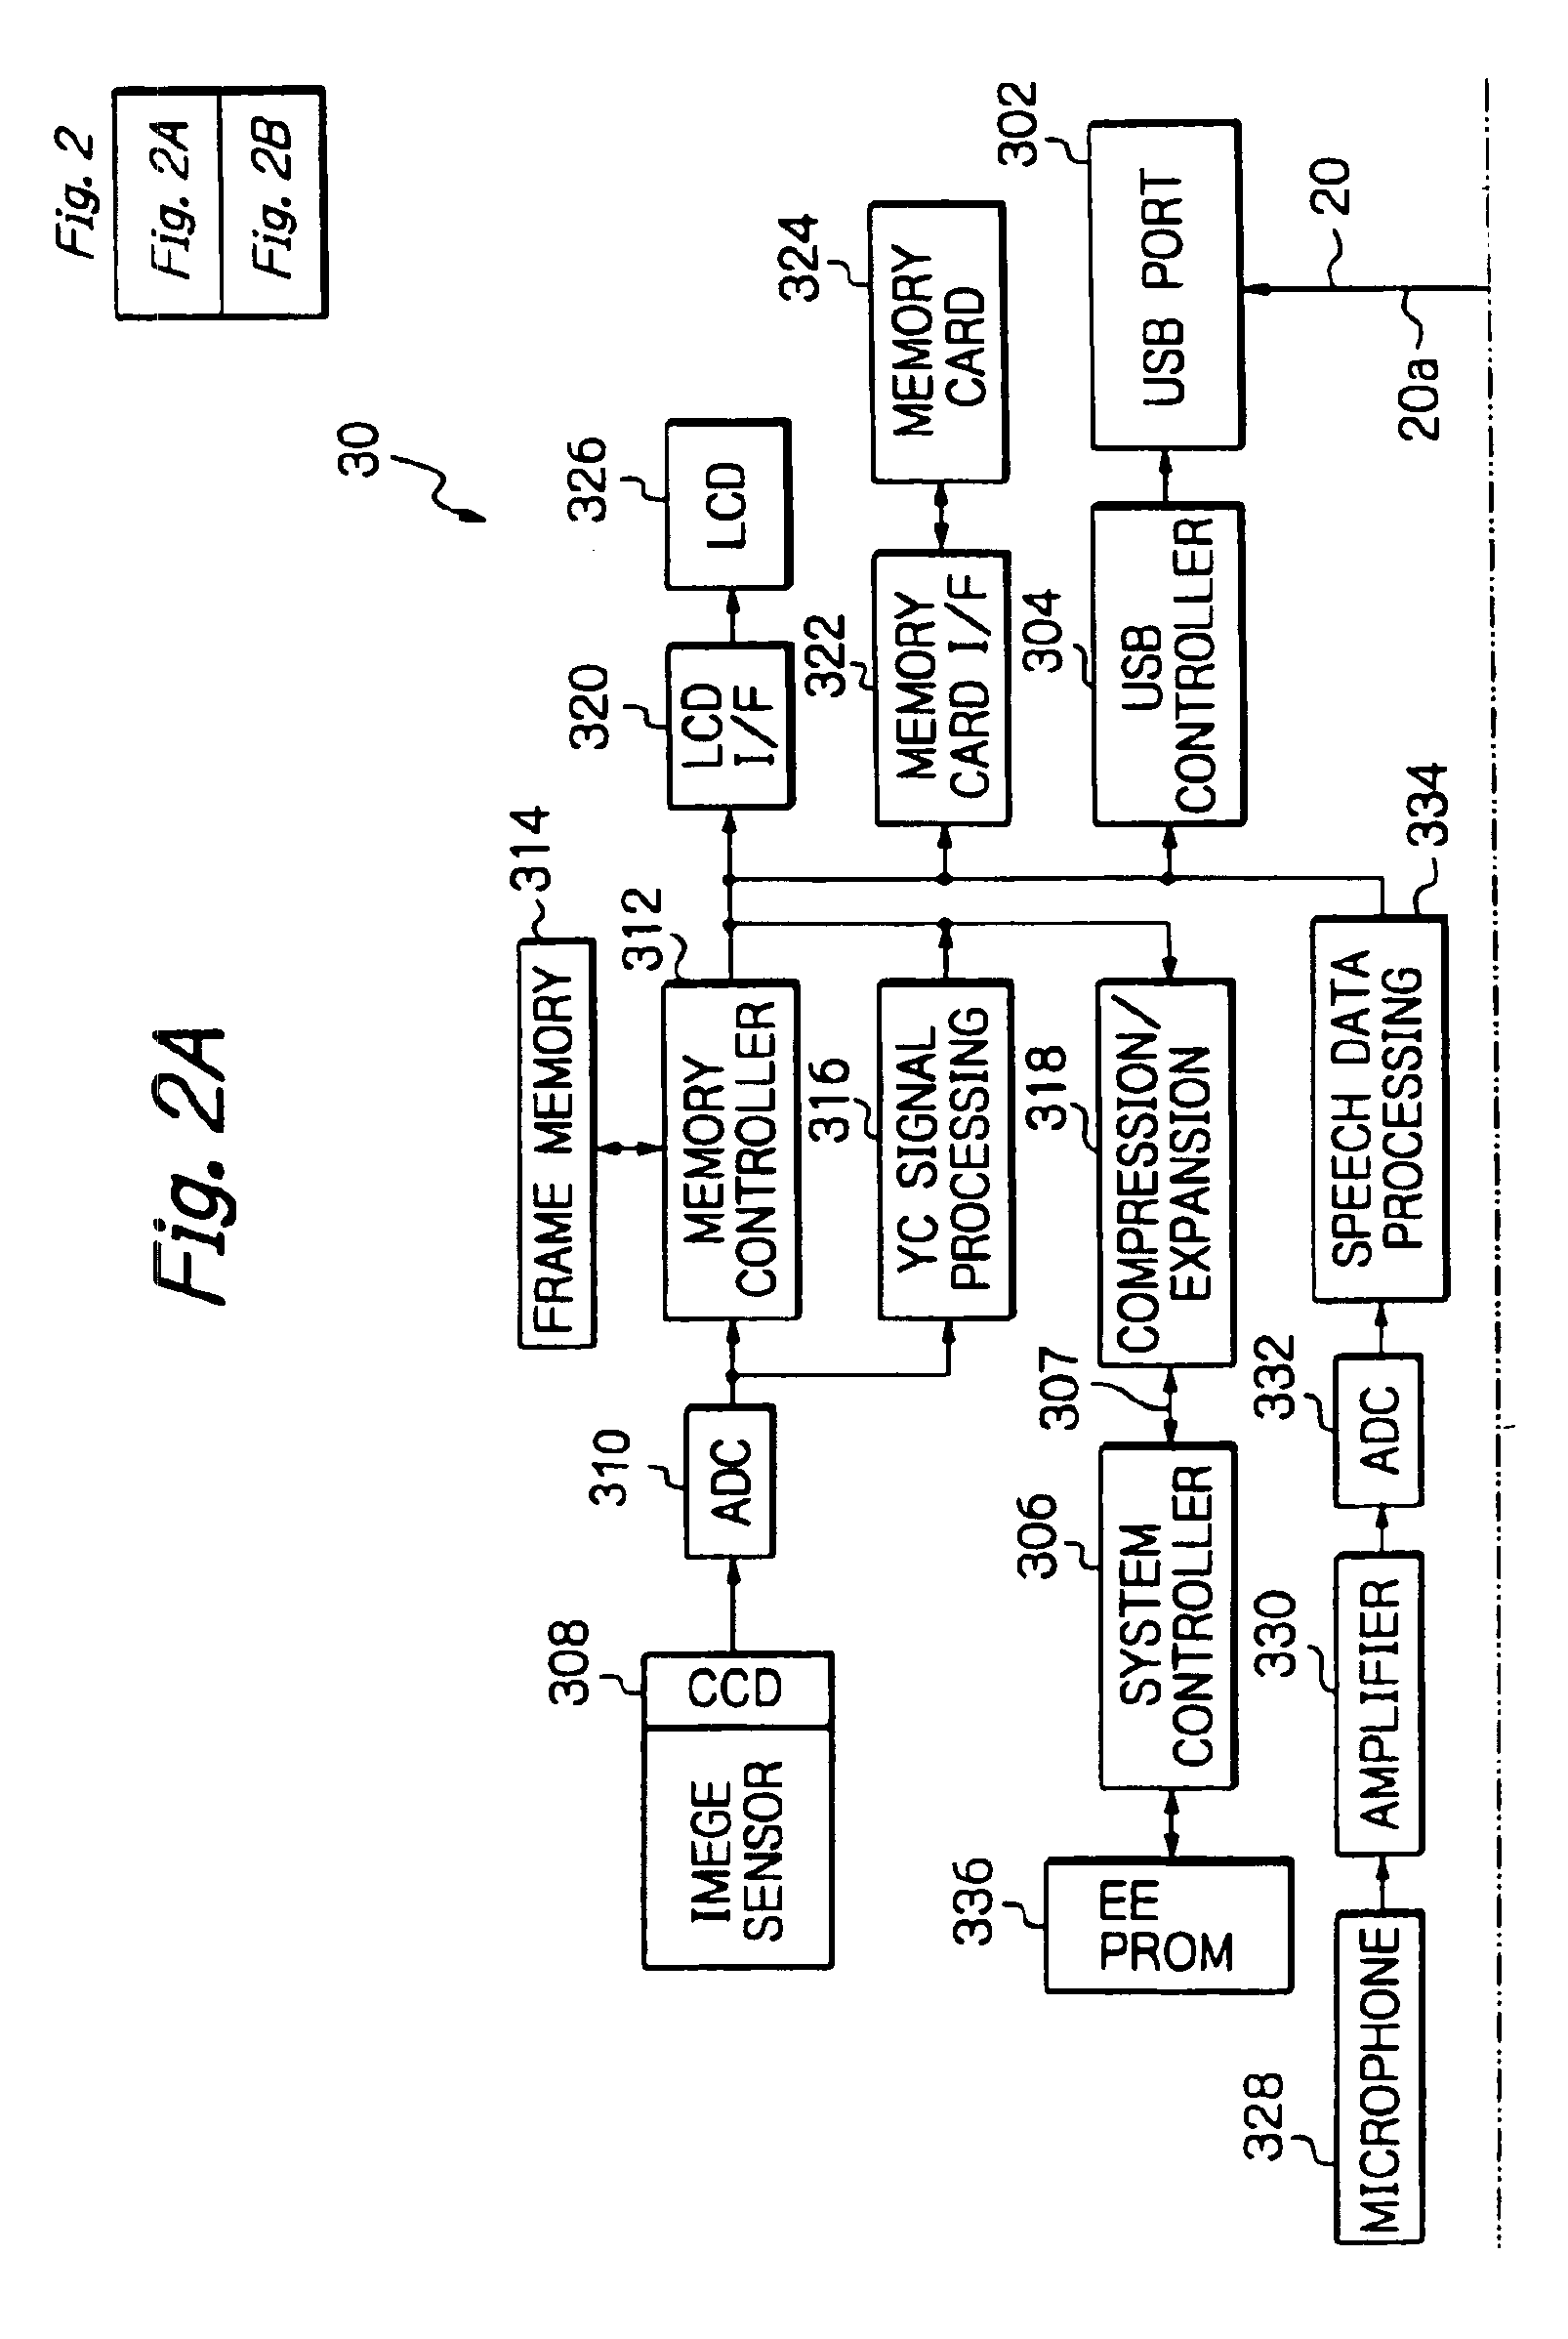 Computer system using a digital camera that is capable of inputting moving picture or still picture data